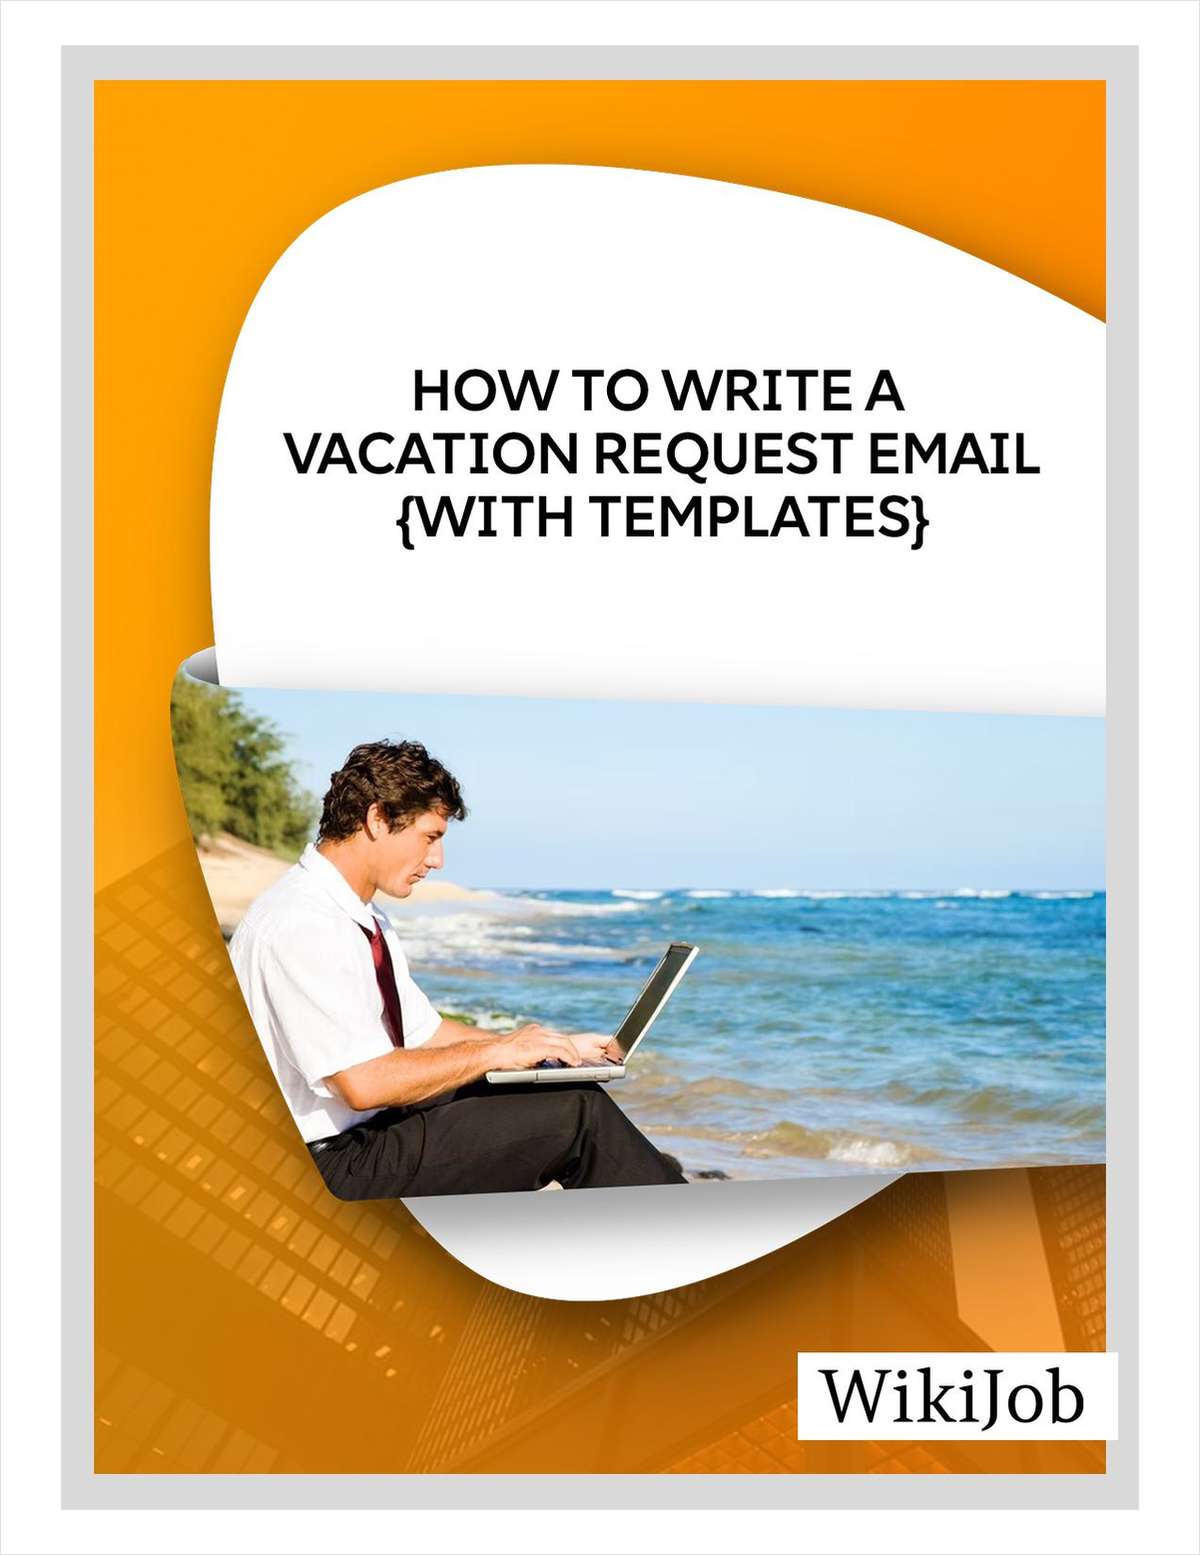 How to Write a Vacation Request Email